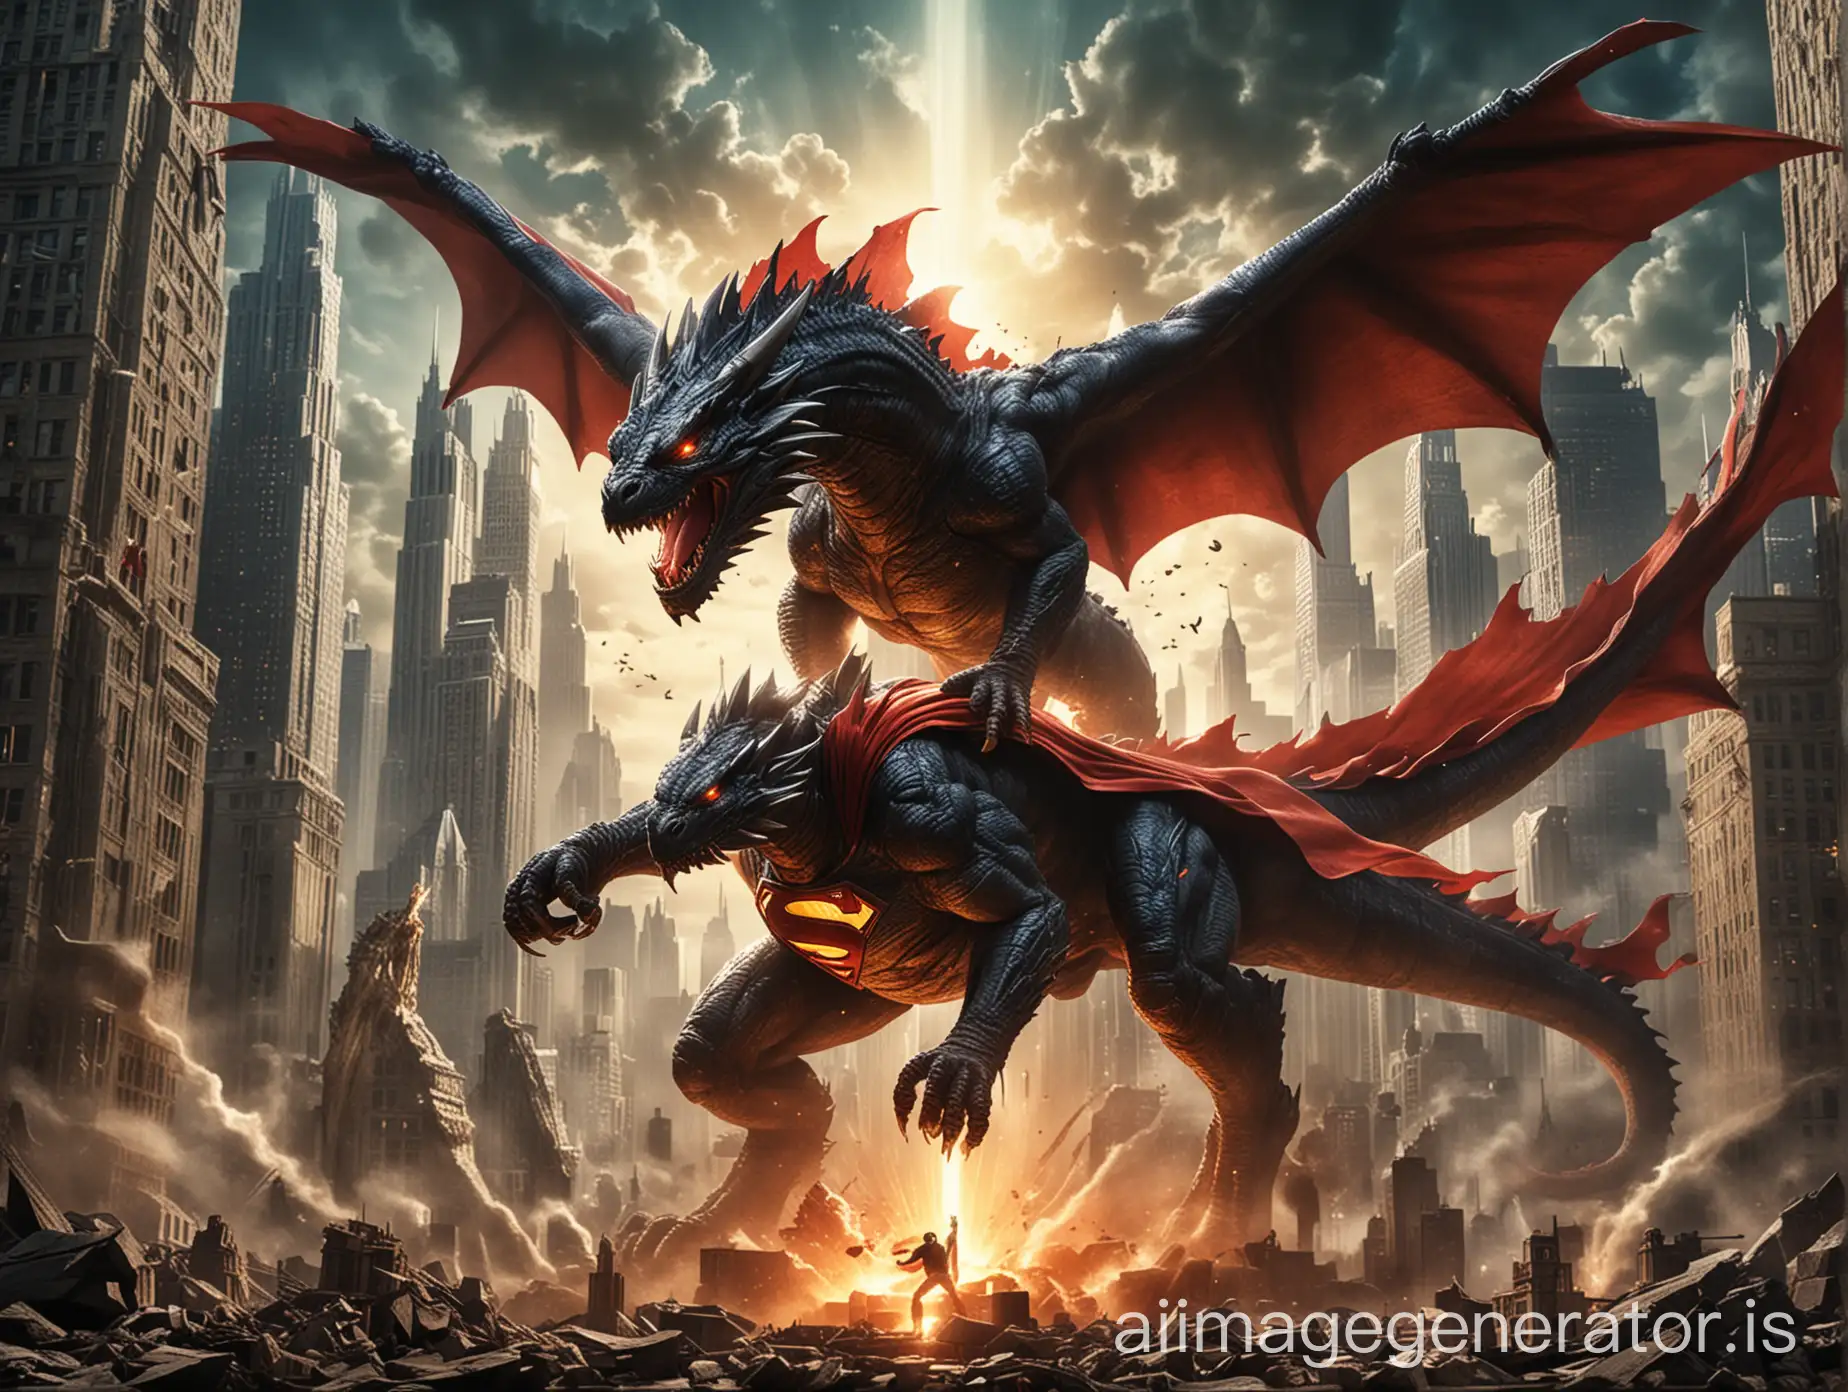 Superman-Legacy-Movie-Poster-with-David-Corenswet-and-Large-Dragon